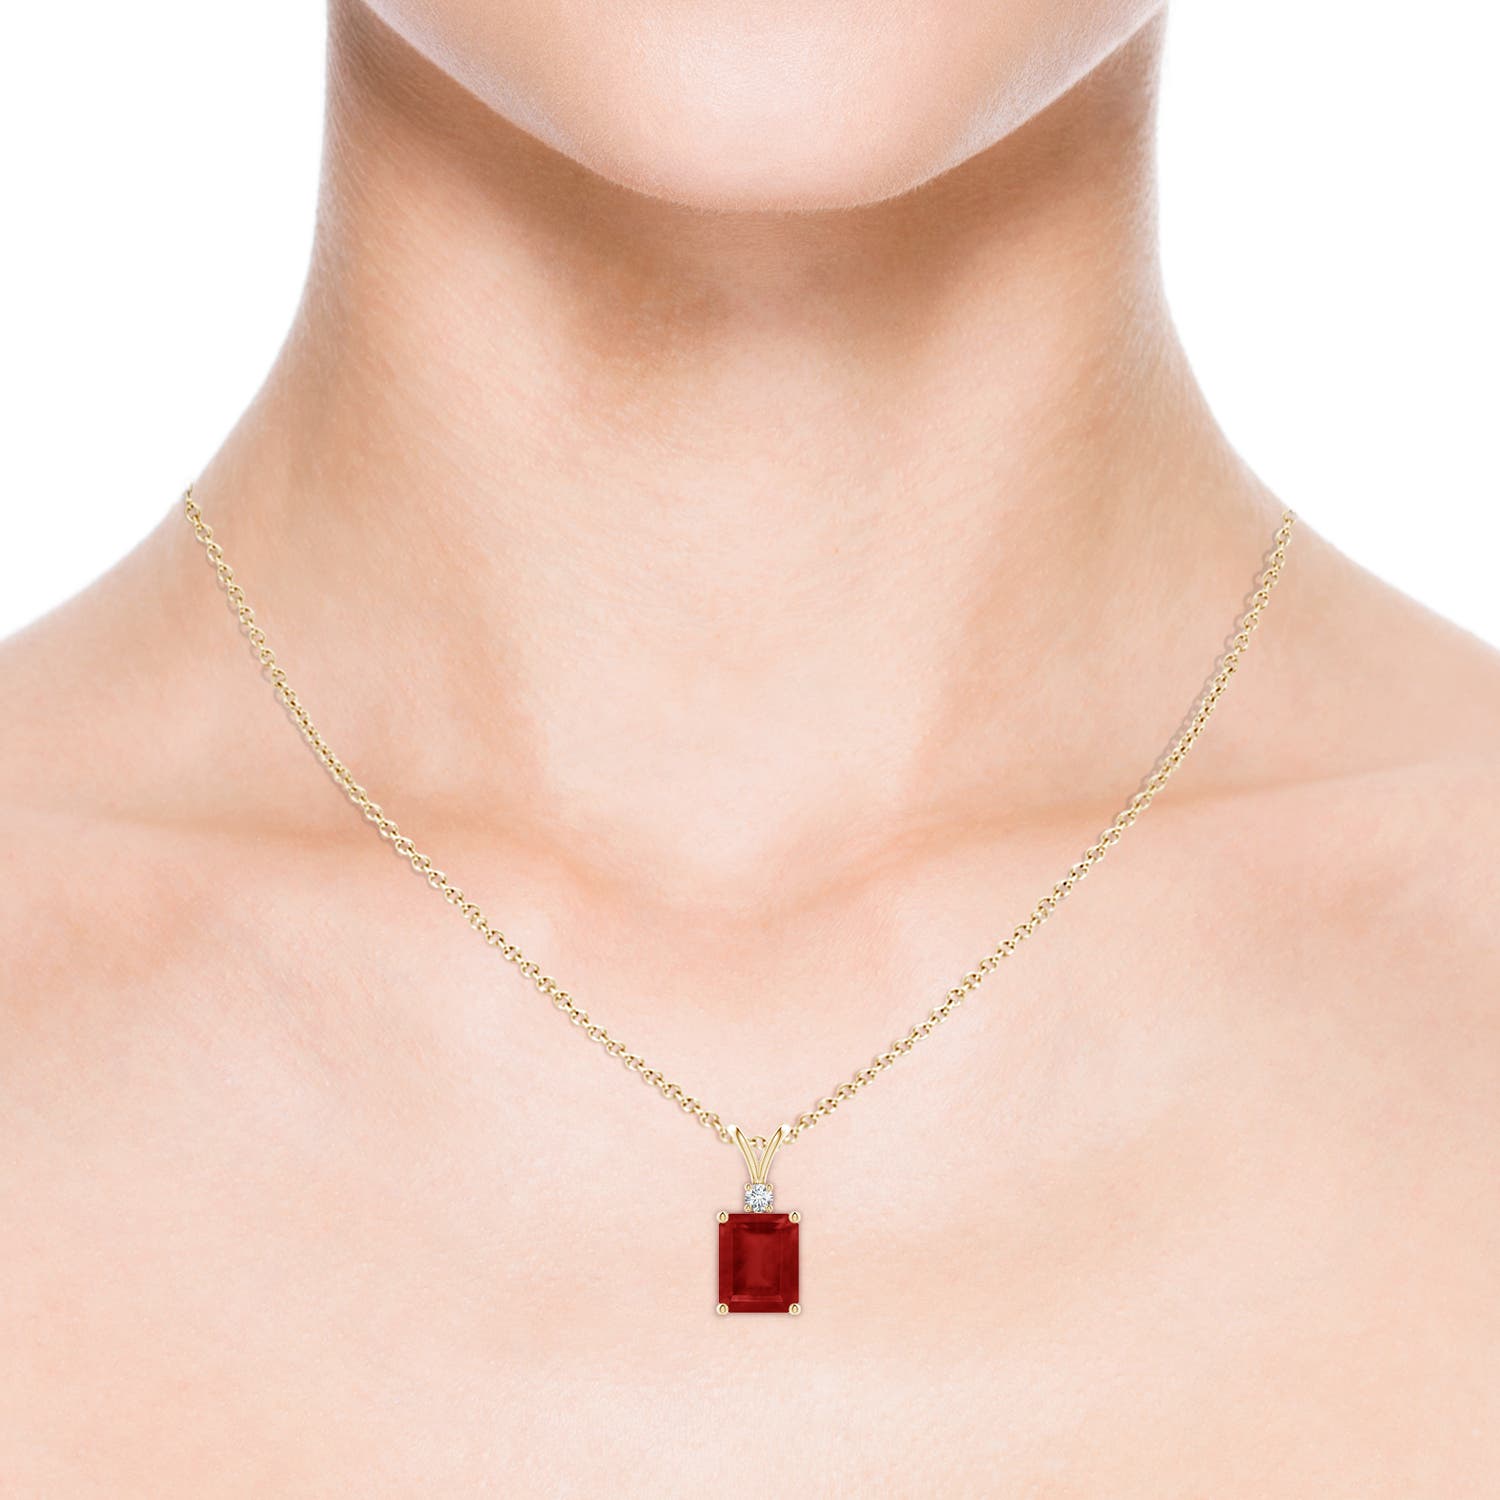 AA - Ruby / 4.11 CT / 14 KT Yellow Gold